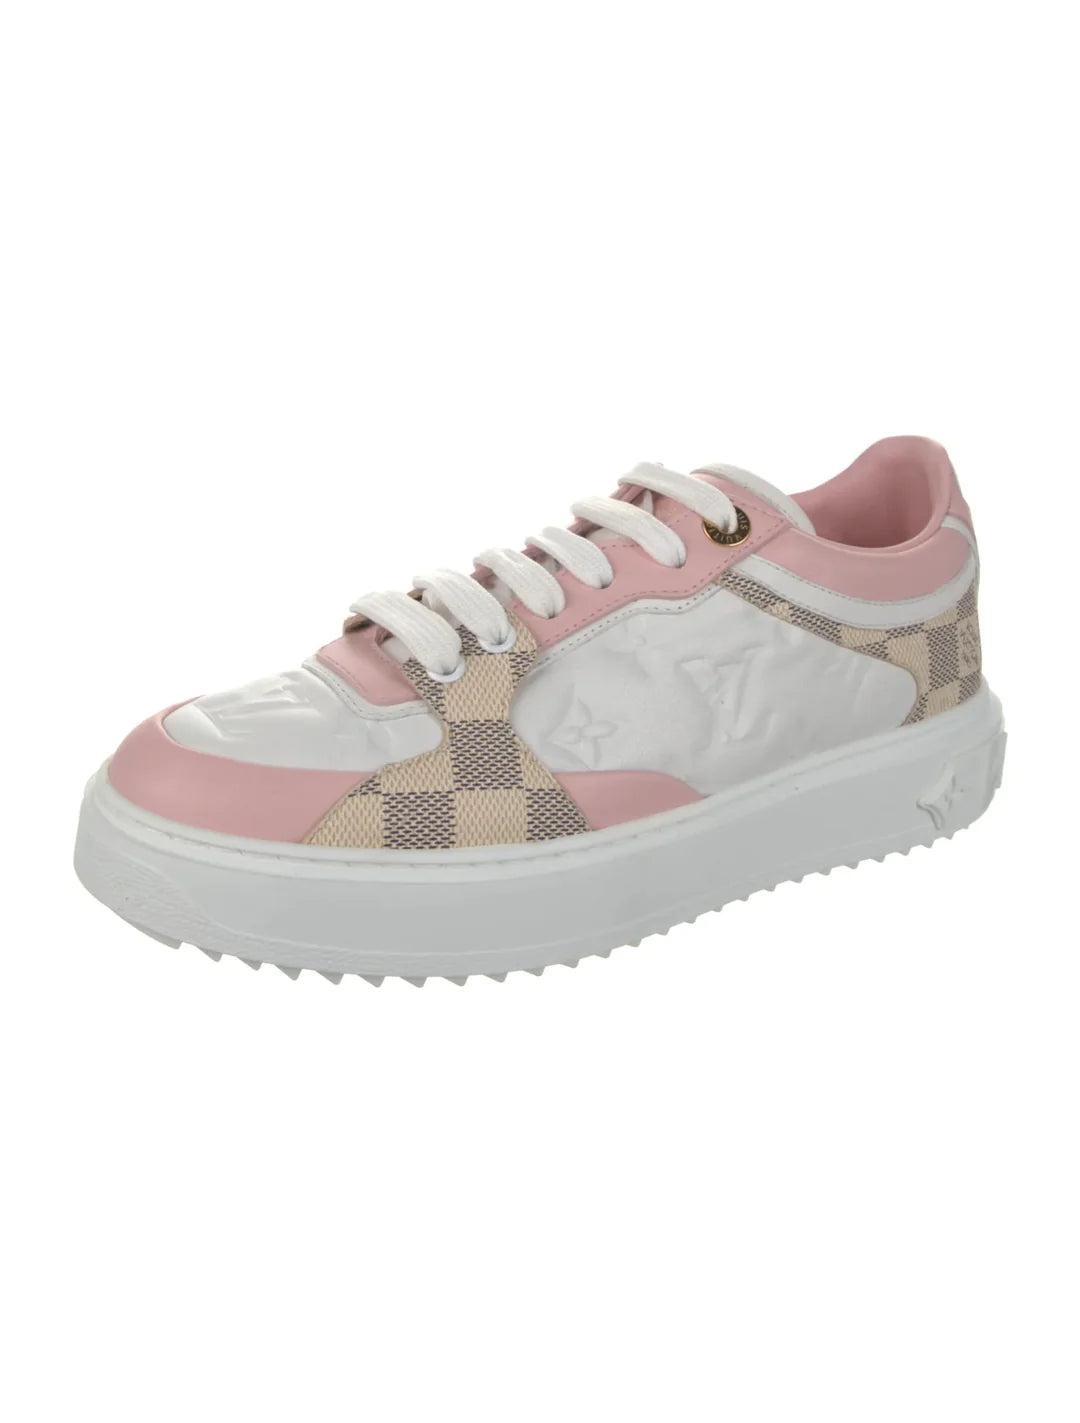 LV Louis Vuitton Time Out Monogram Pink Red White Sneakers